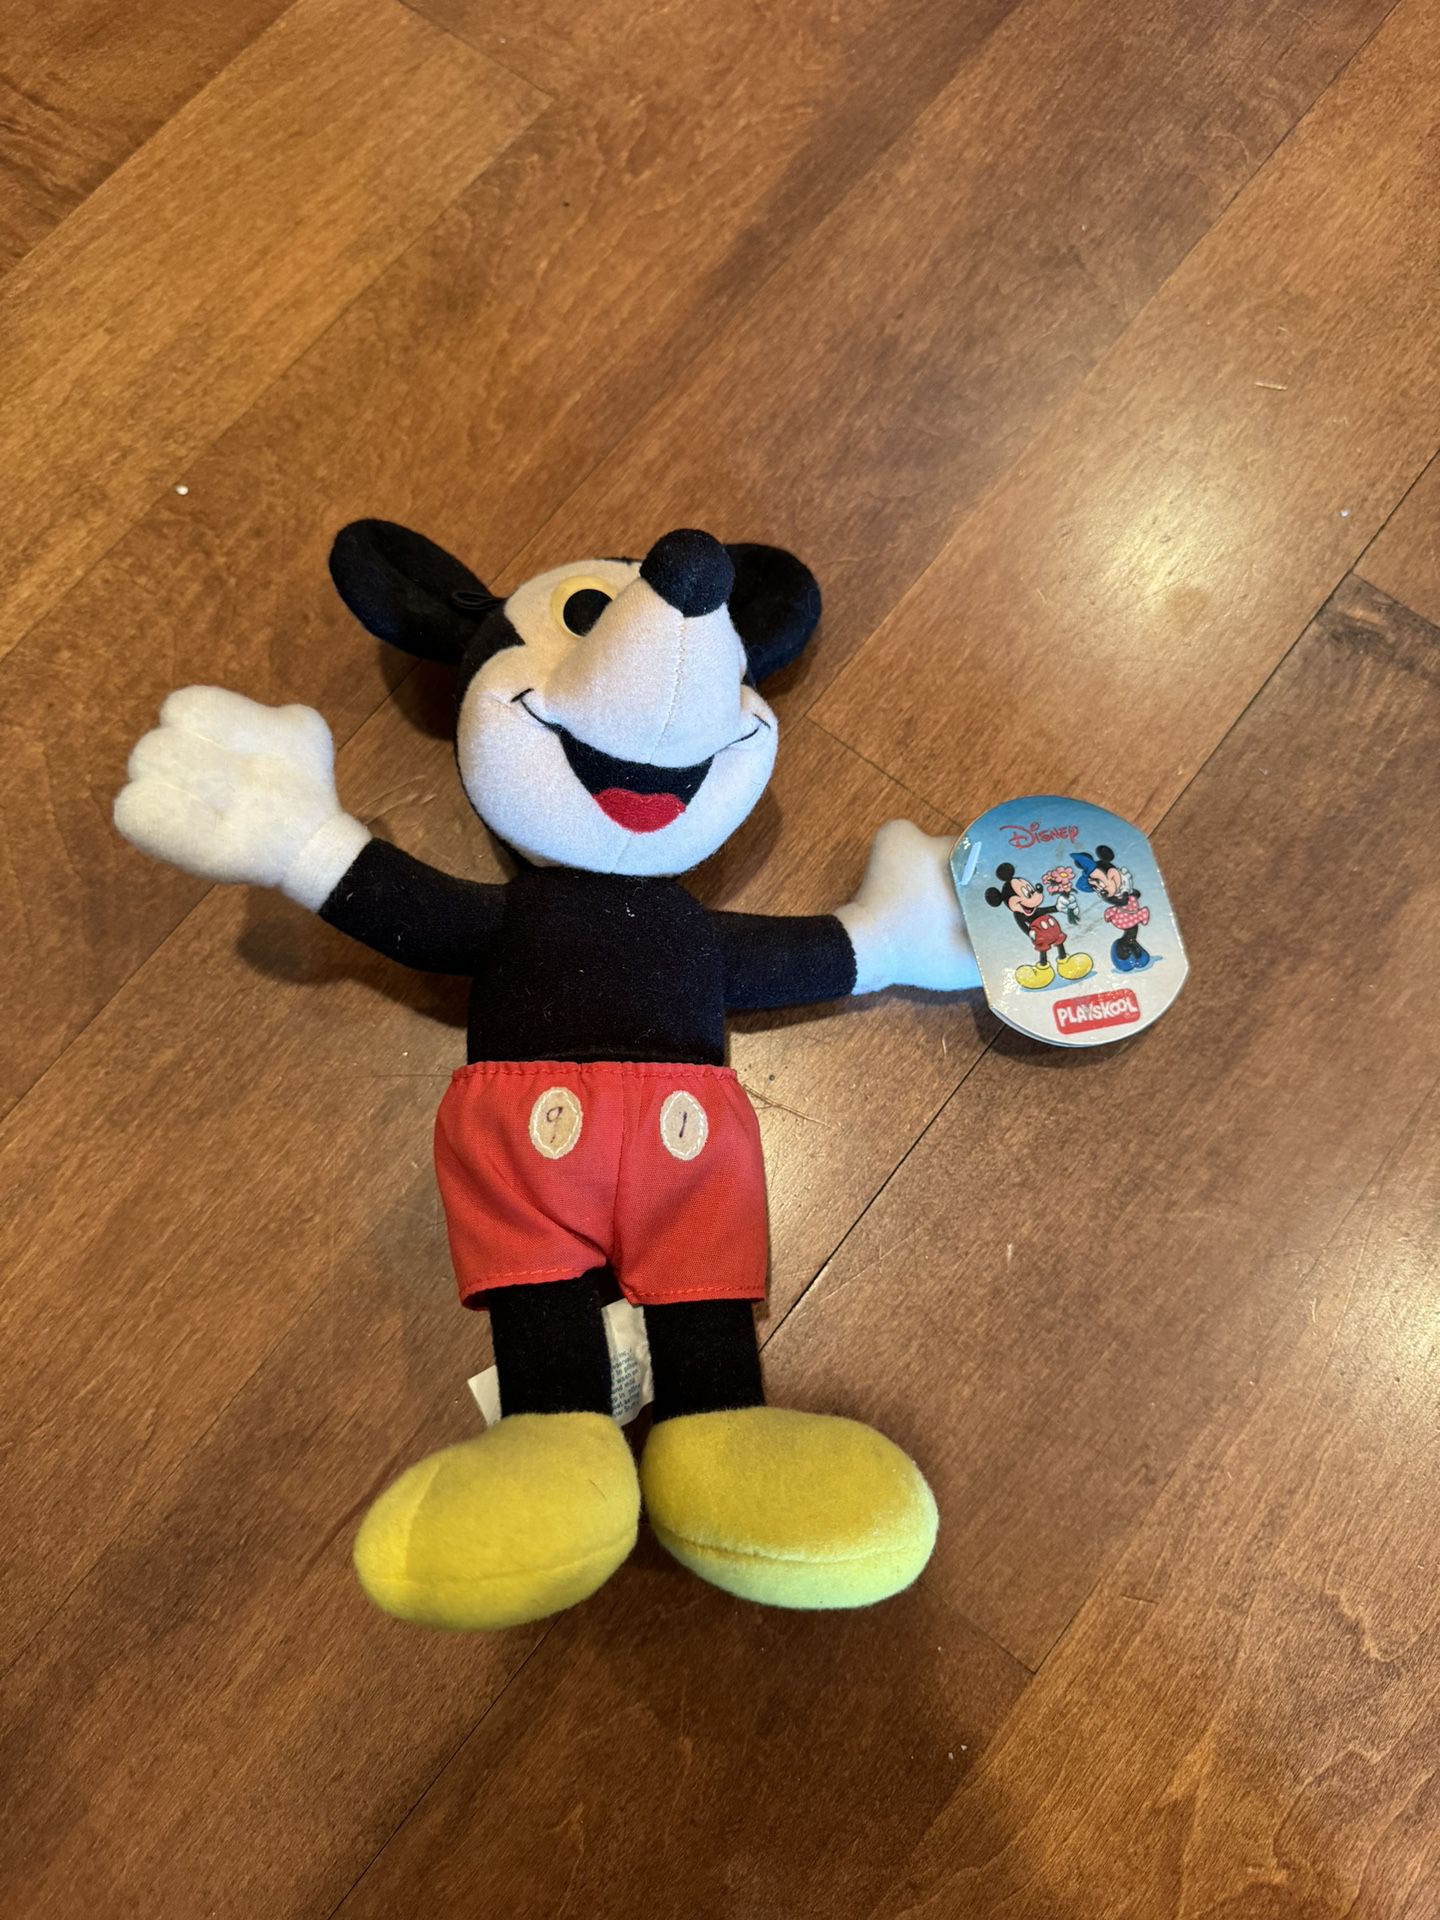 Vintage 1989 Disney Mickey Mouse Plush Playskool Shopping Available 